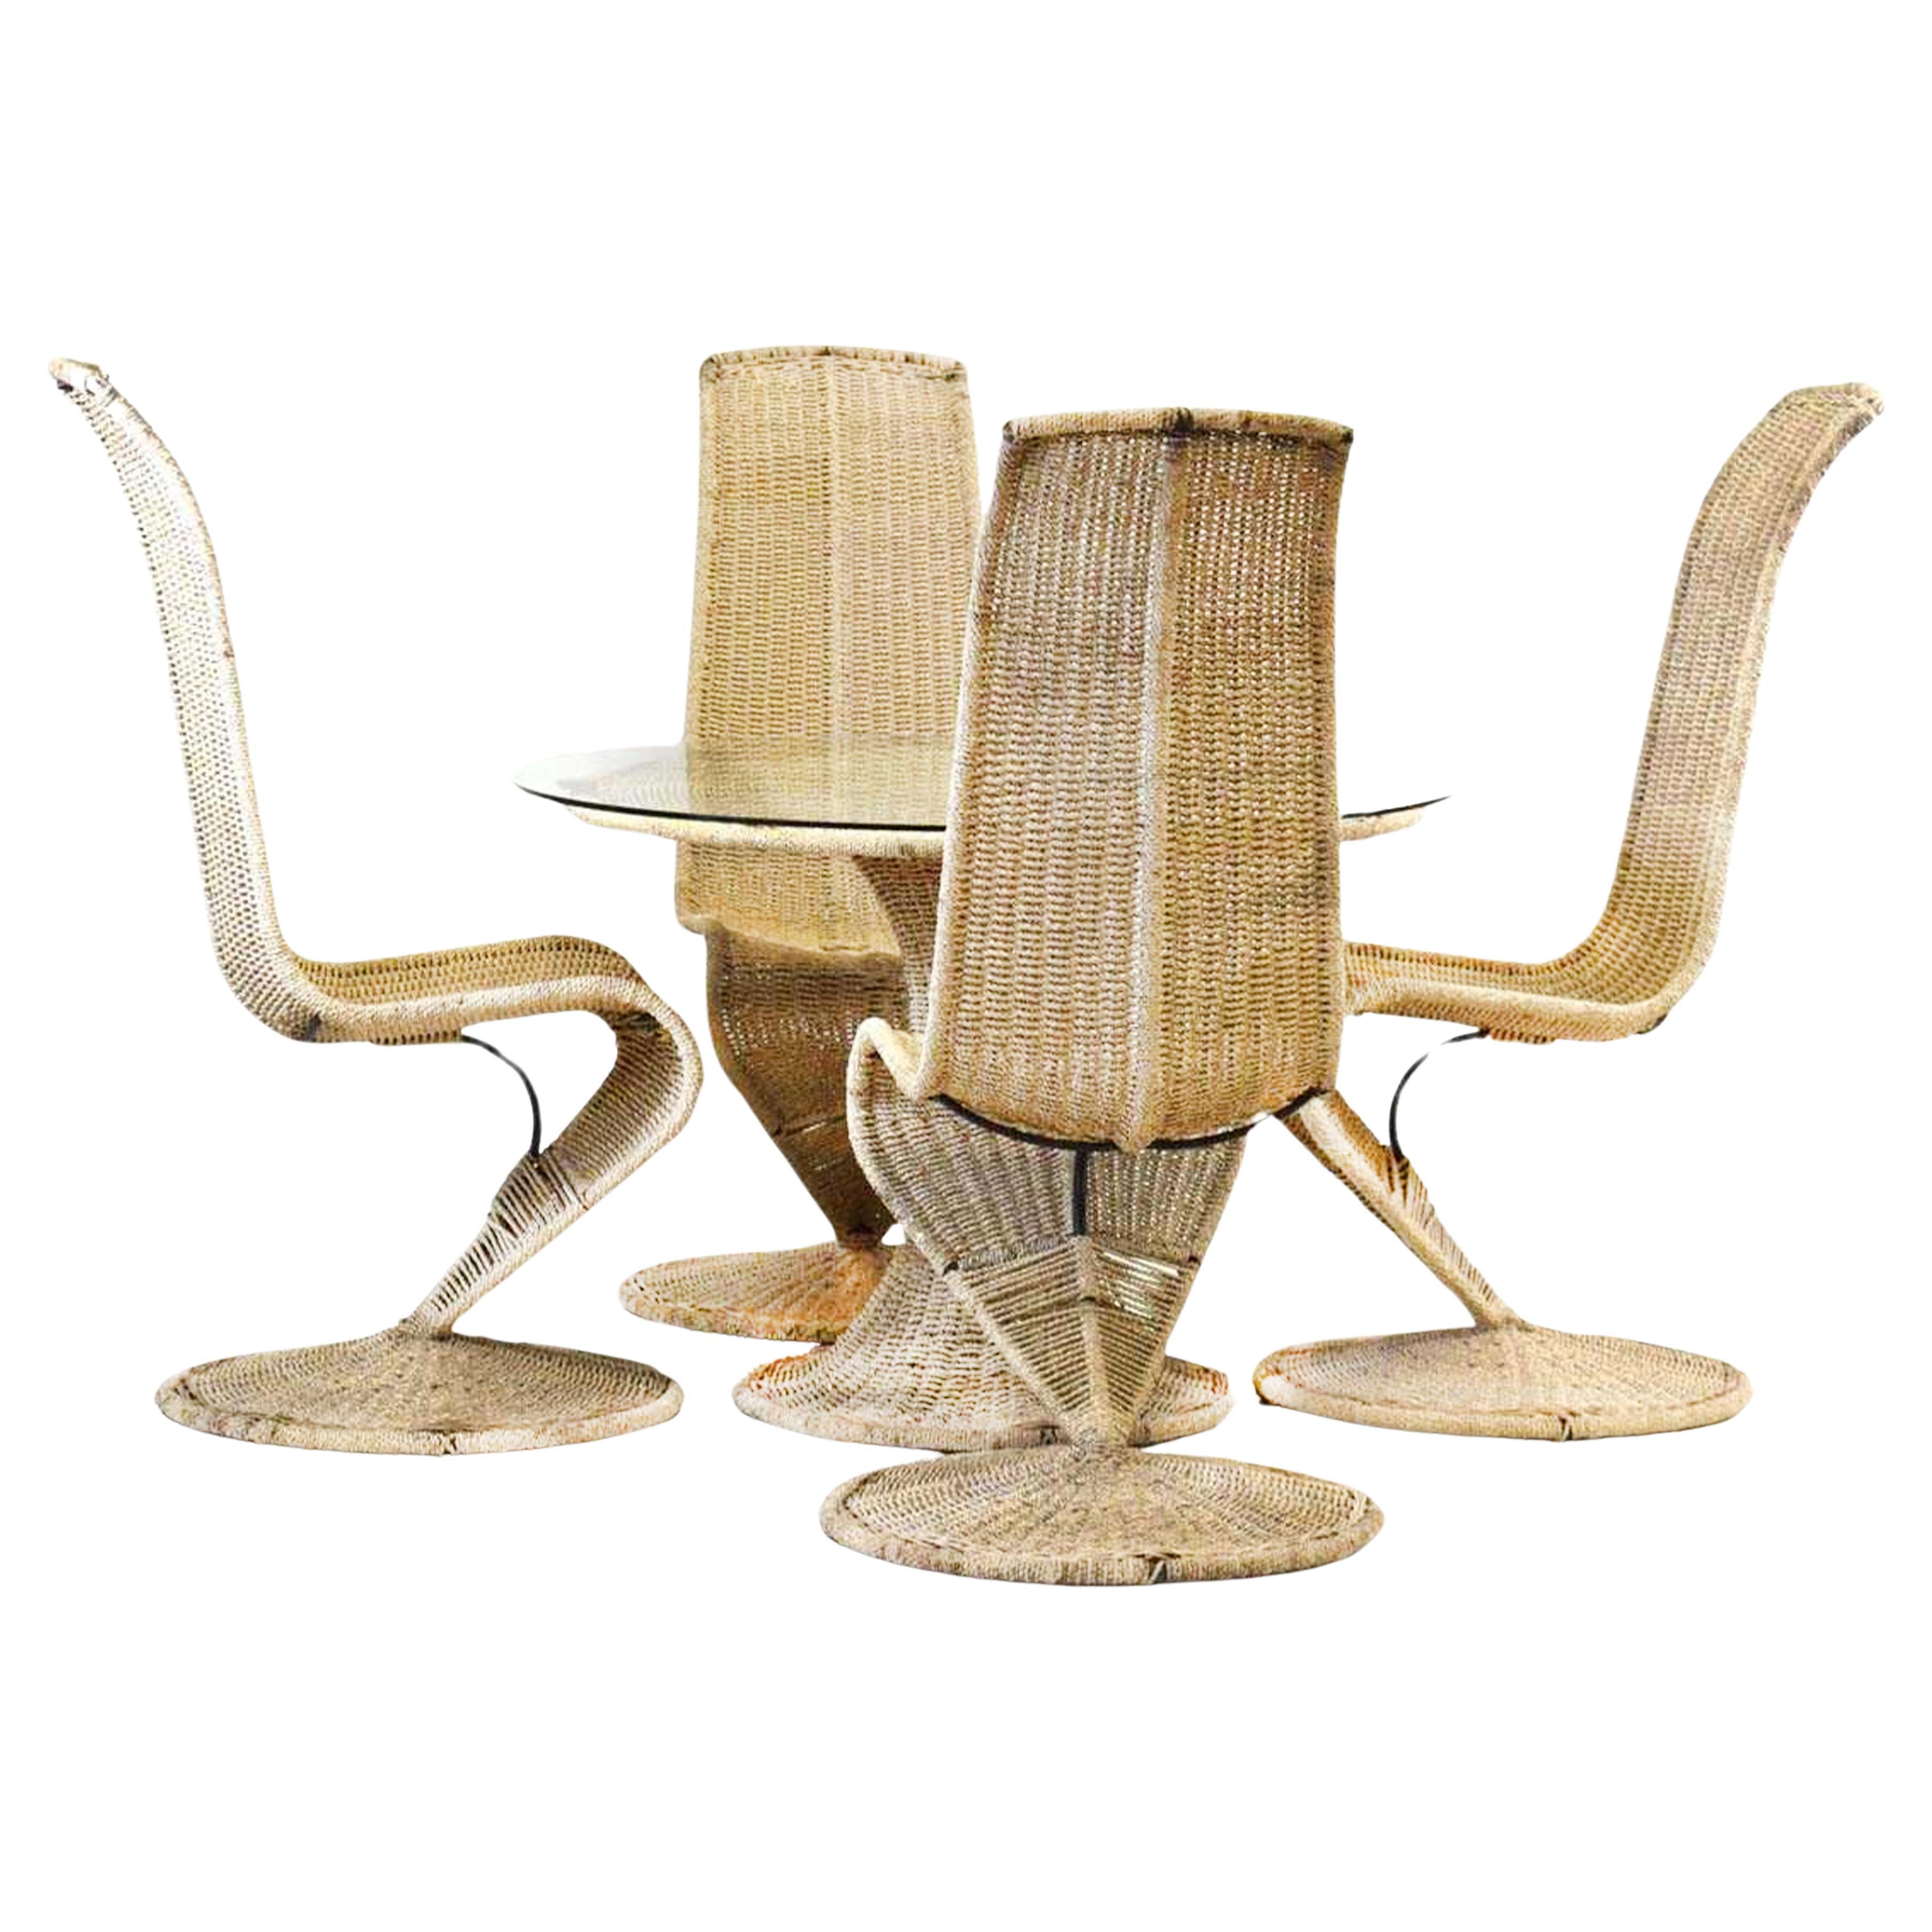 Rare Marzio Cecchi Circular Glazed Pedestal Dining Table Set With Four S Chairs For Sale